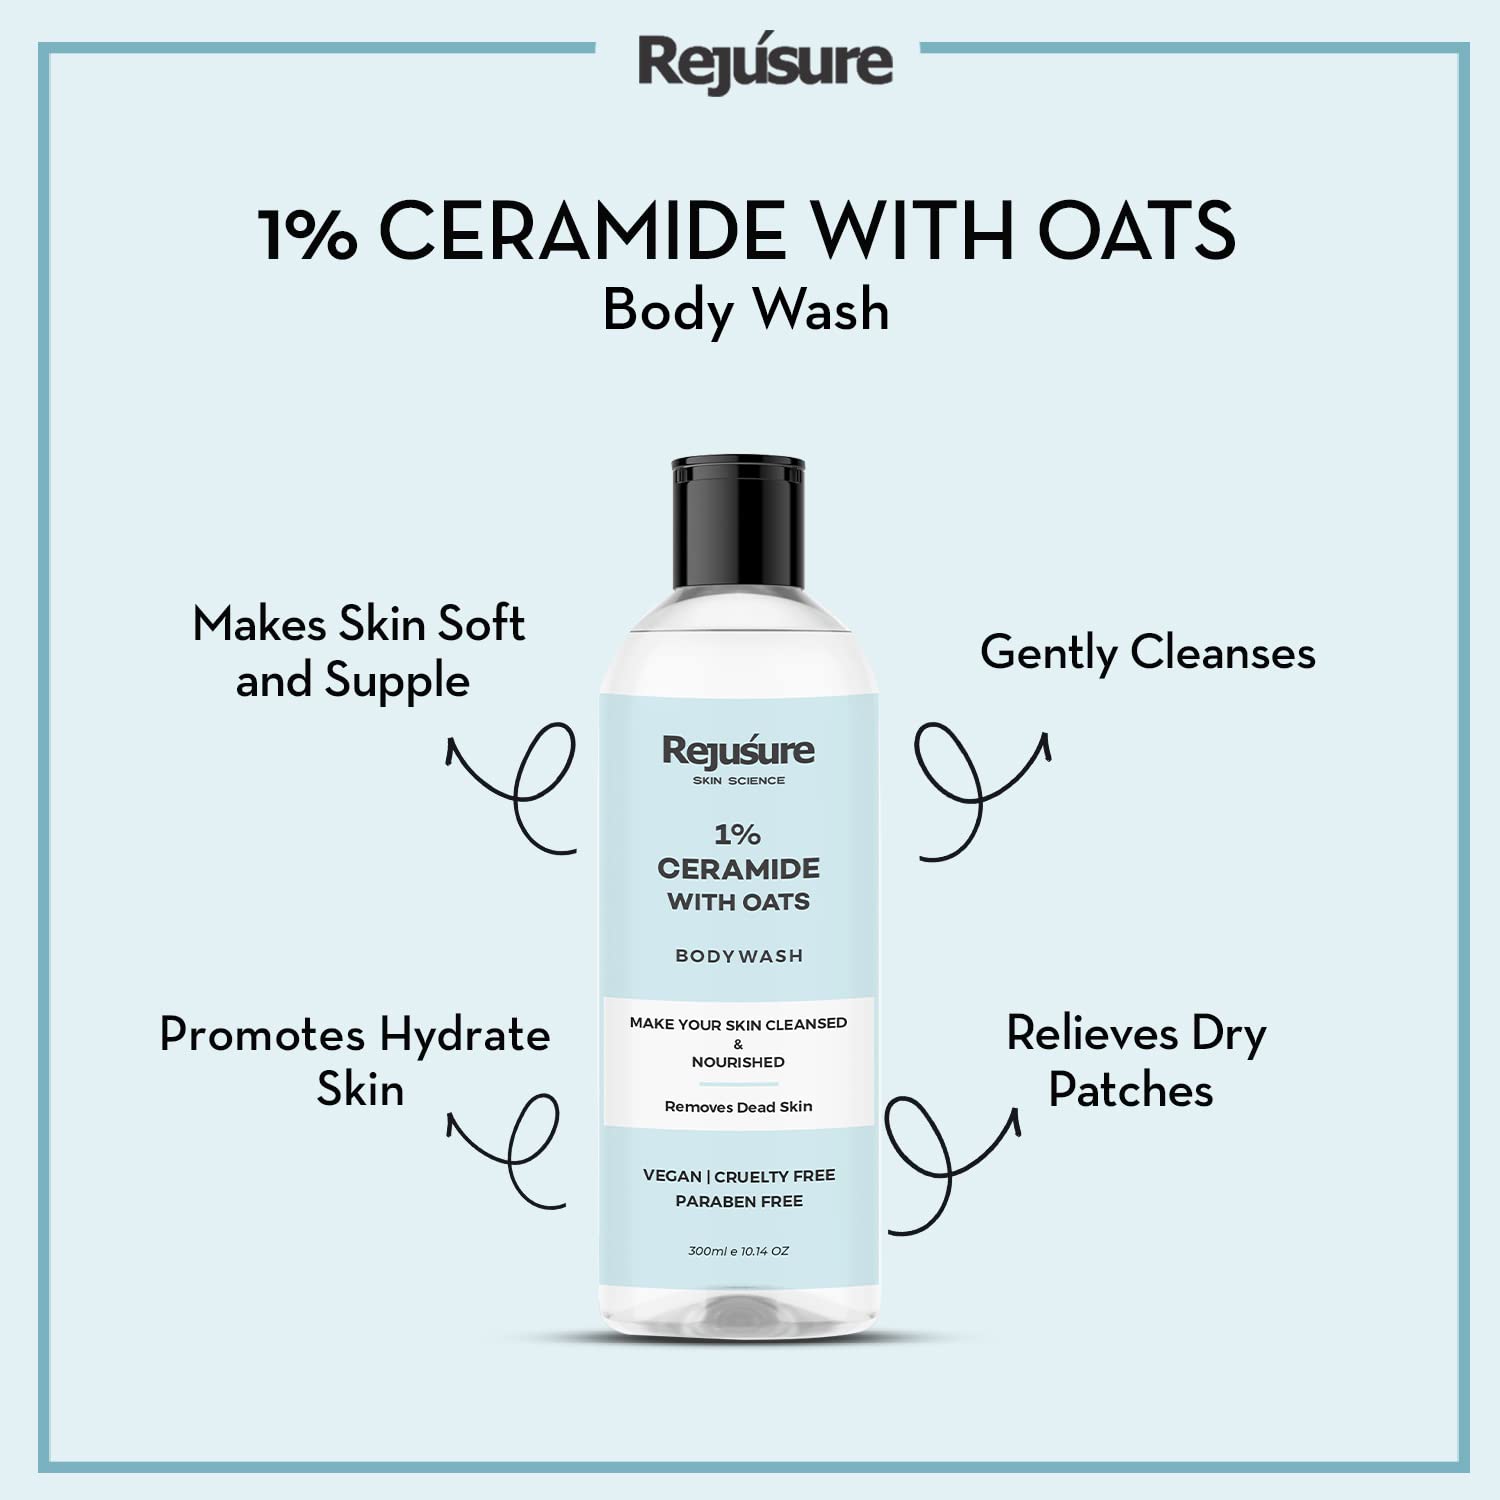 Rejusure 1% Ceramide & Oats Complex Daily Hydrating Body Wash with Ceramide & Oats for Intense Hydration, Freshness and Deep Cleansing, Works on Dry & Flaky skin For Men & Women - 300 ml